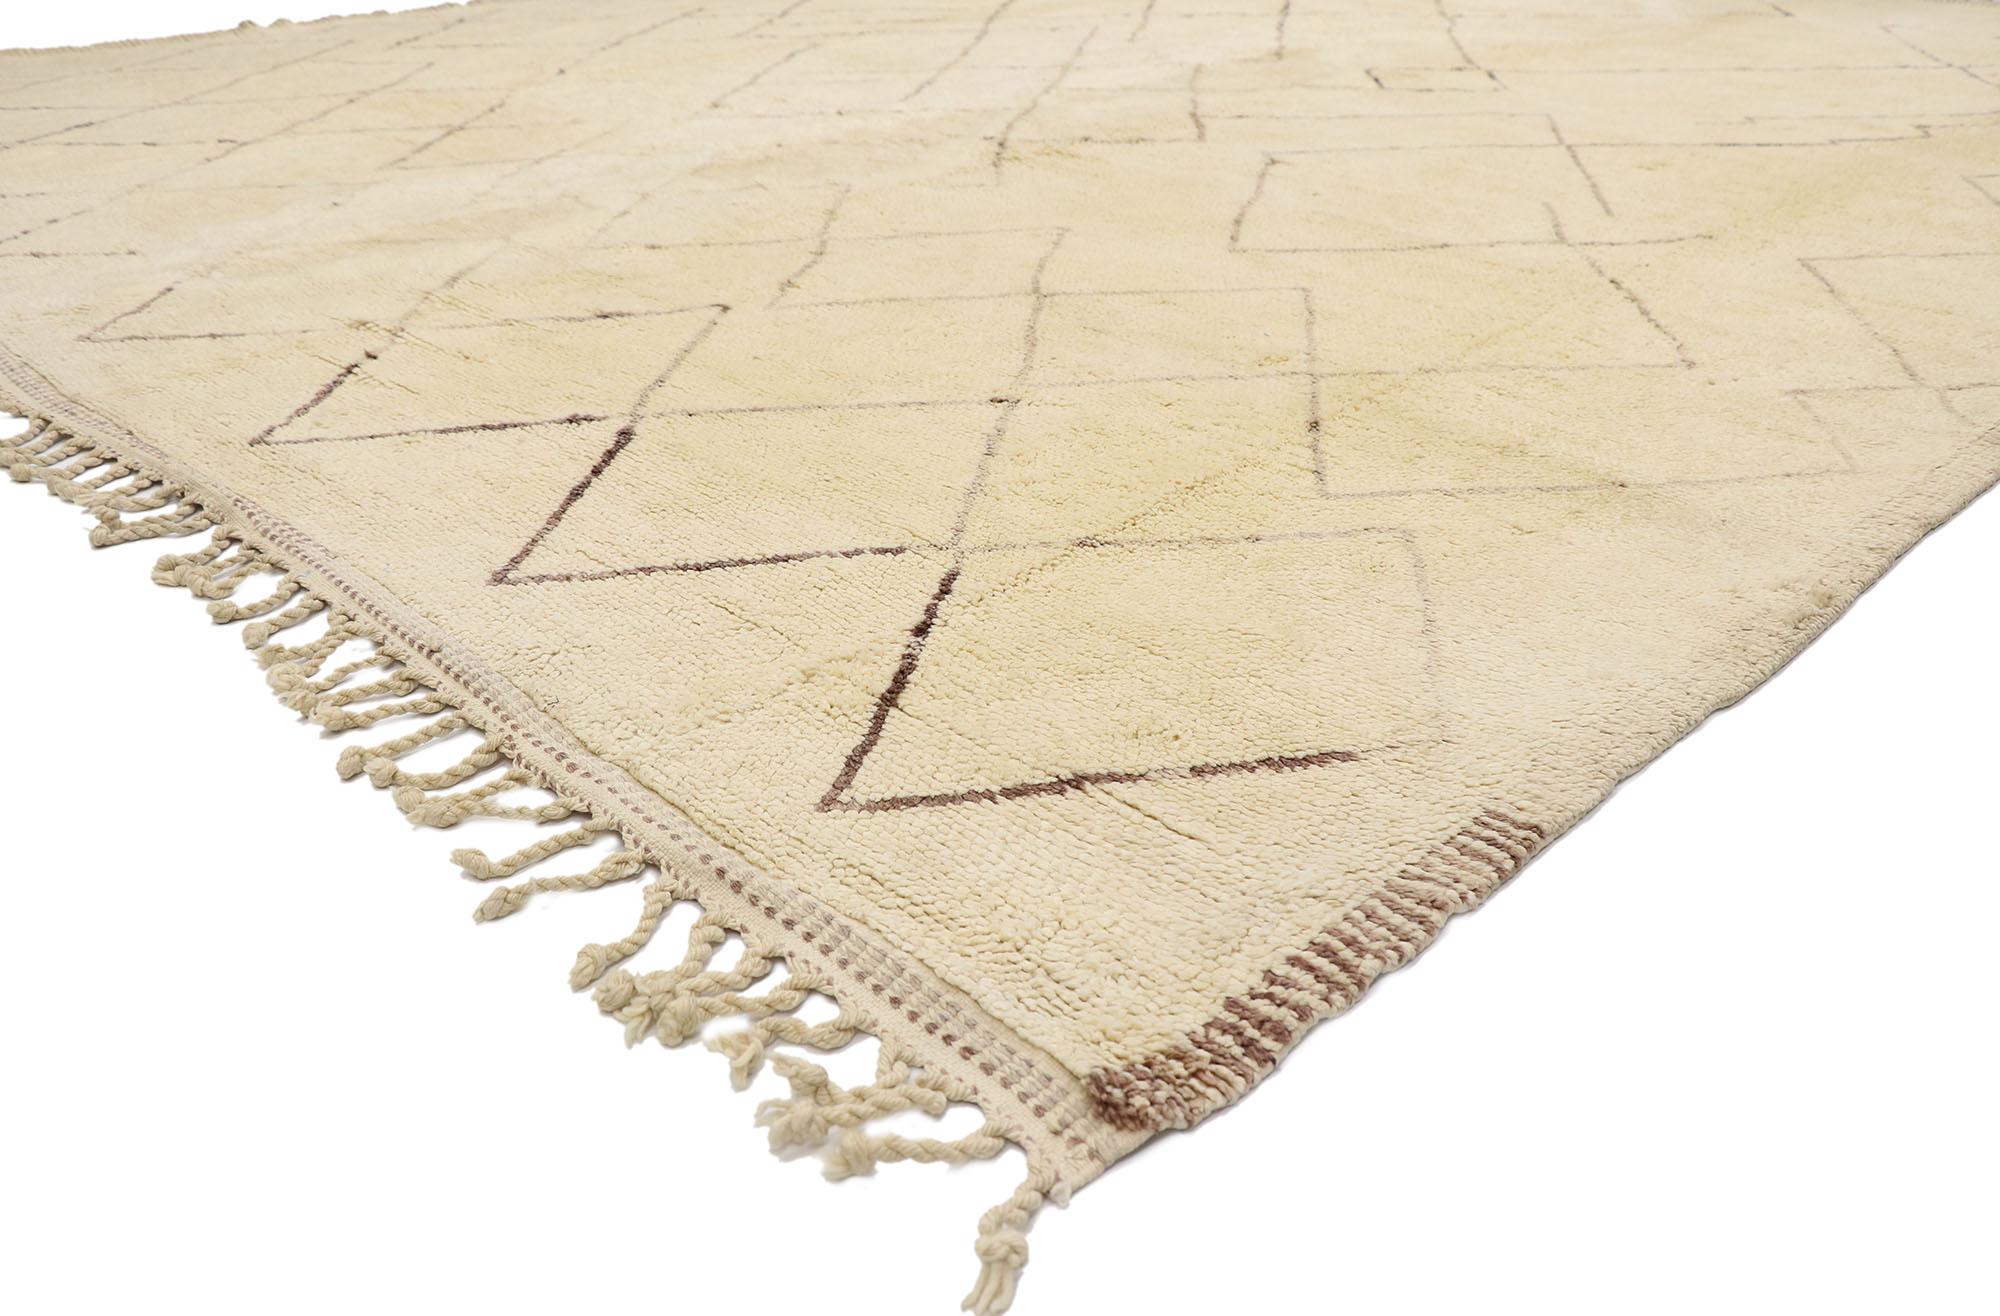 21148 Large Neutral Berber Moroccan Rug 11'05 x 14'06.
Minimalist Shibui meets Wabi-Sabi in this hand knotted wool Berber Moroccan rug. The perfectly imperfect lattice and earthy neutral colors woven into this piece work together to provide a